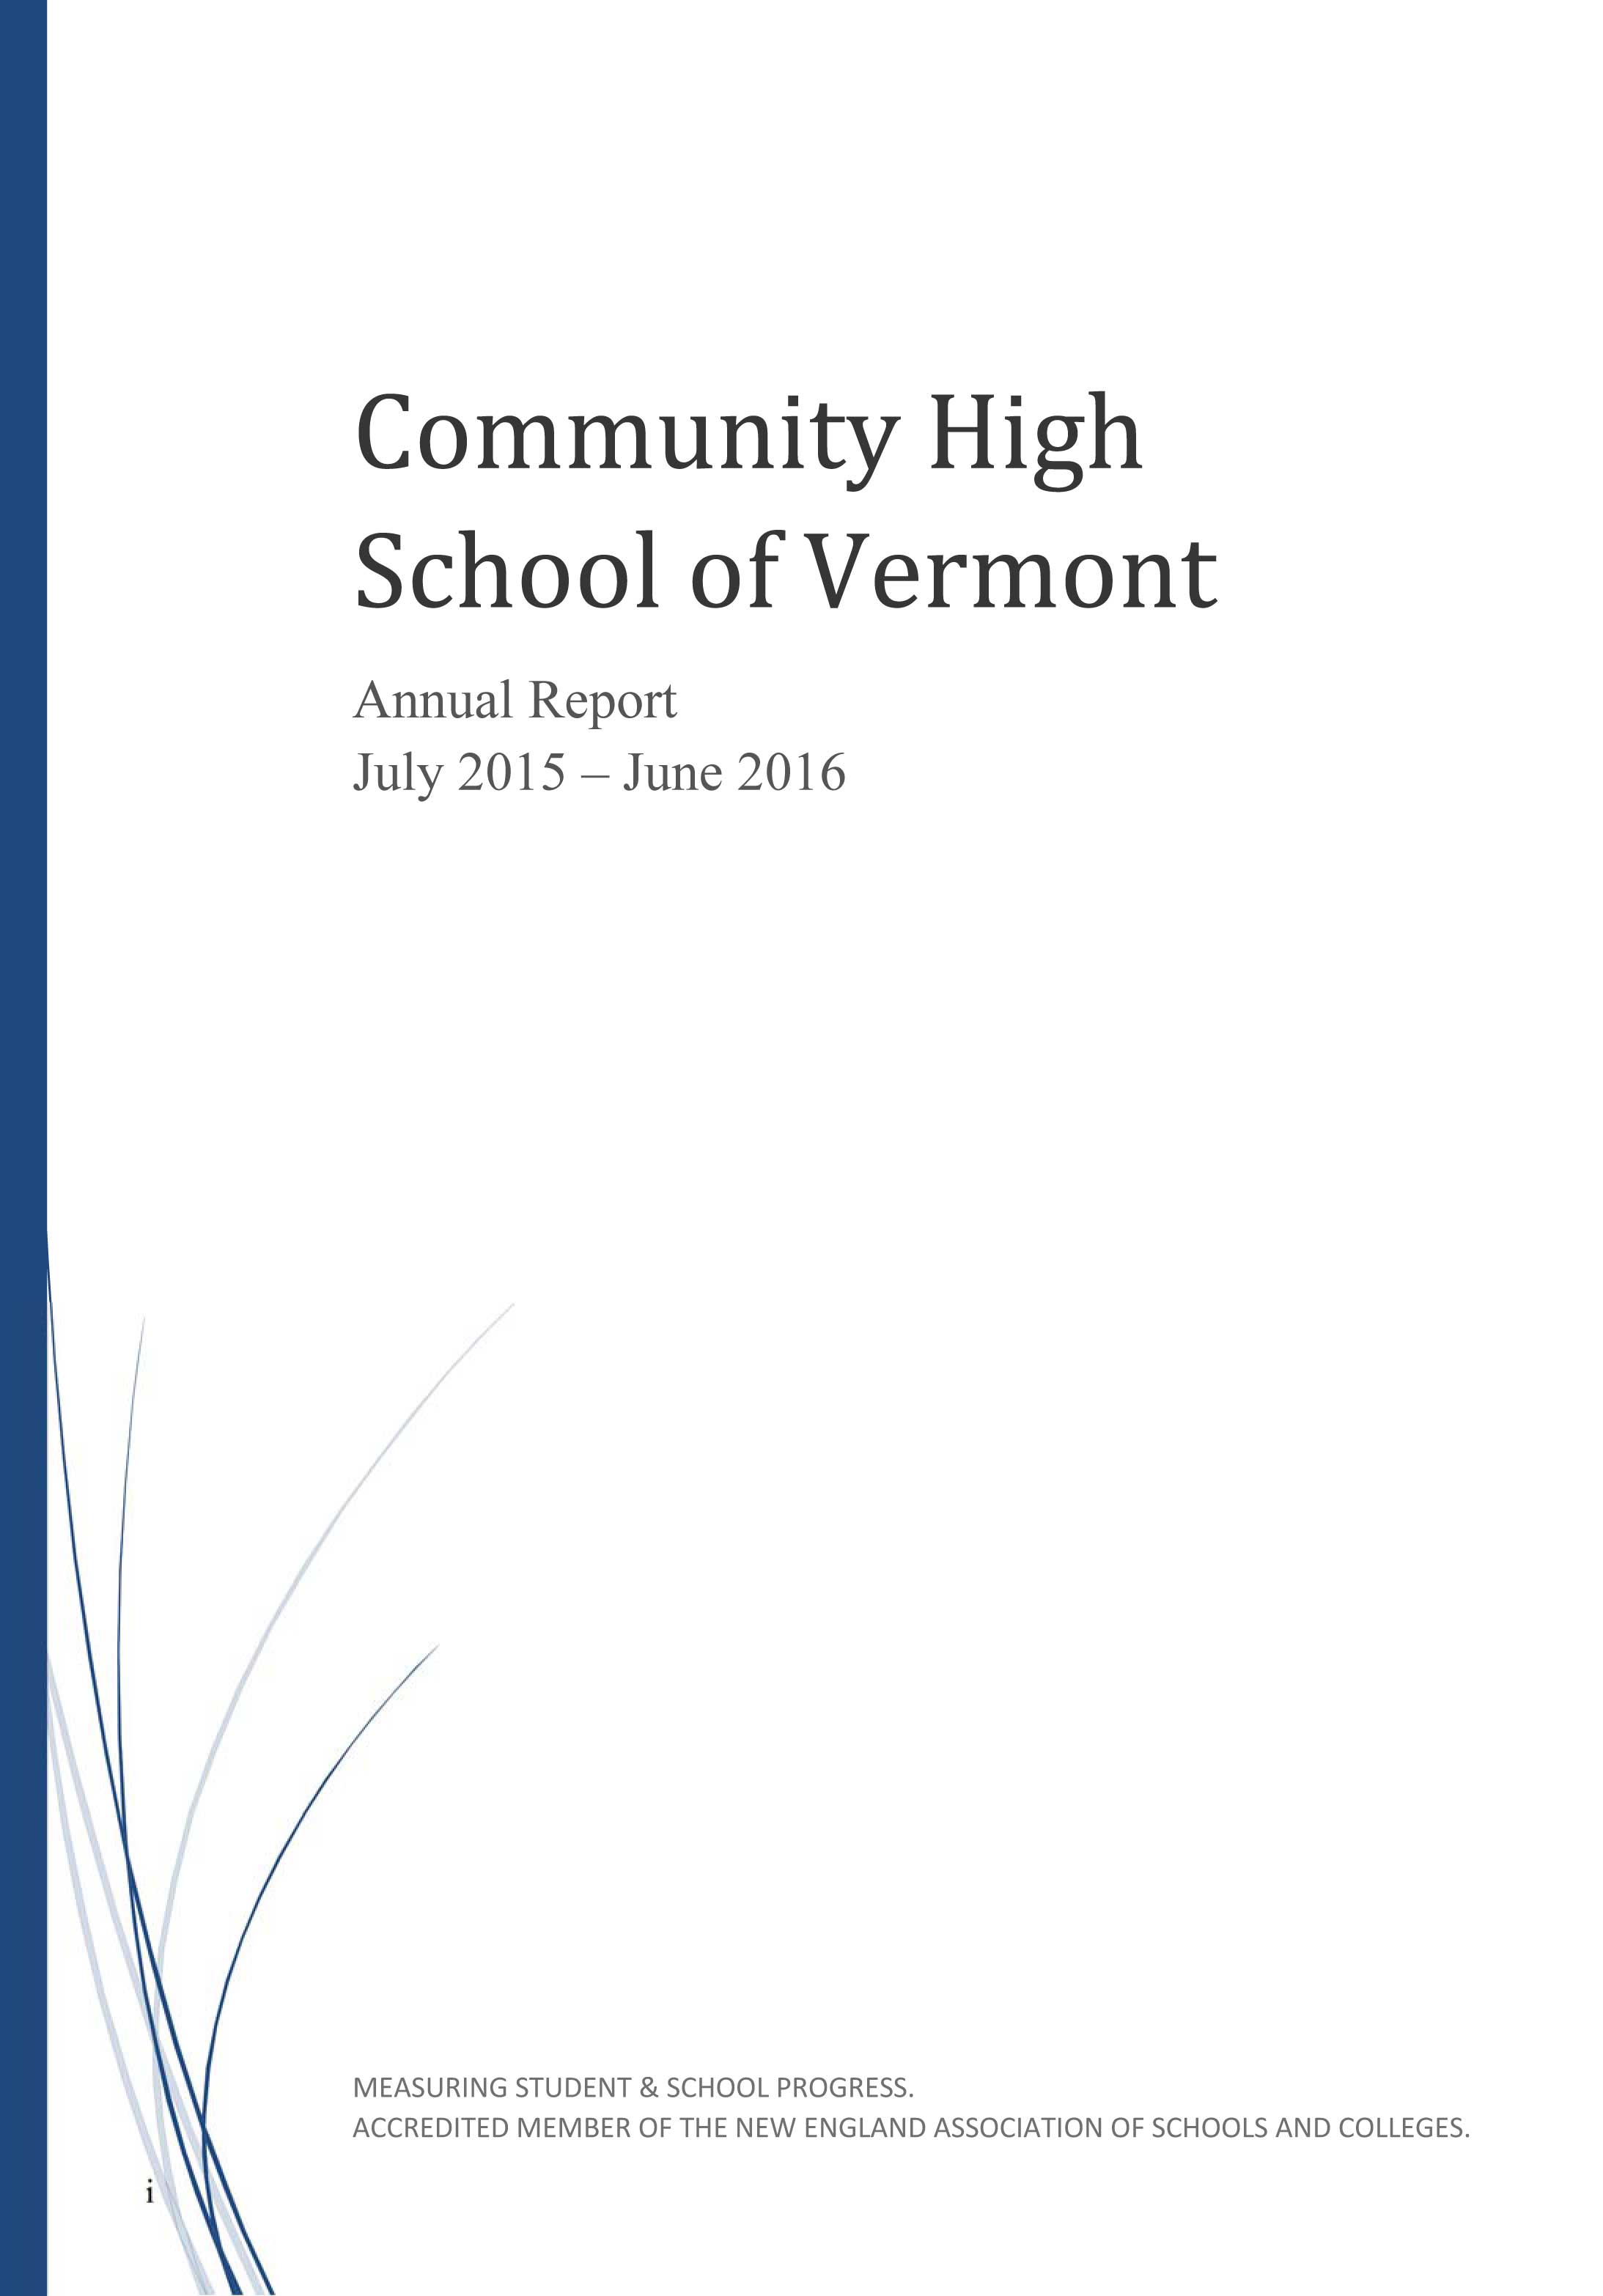 2015-2016 cover